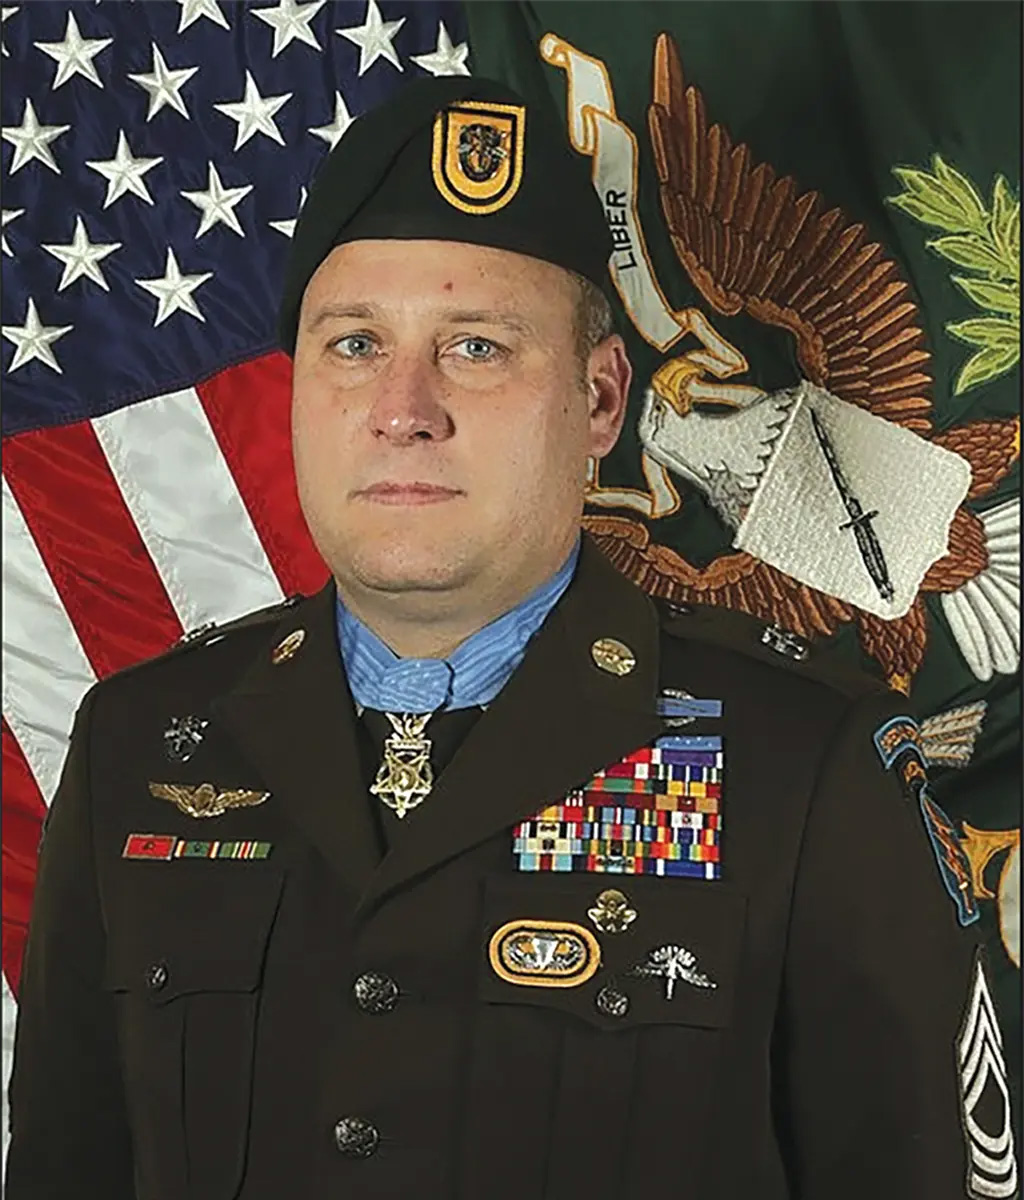 Medal of Honor recipient U.S. Army Master Sgt. Earl D. Plumlee